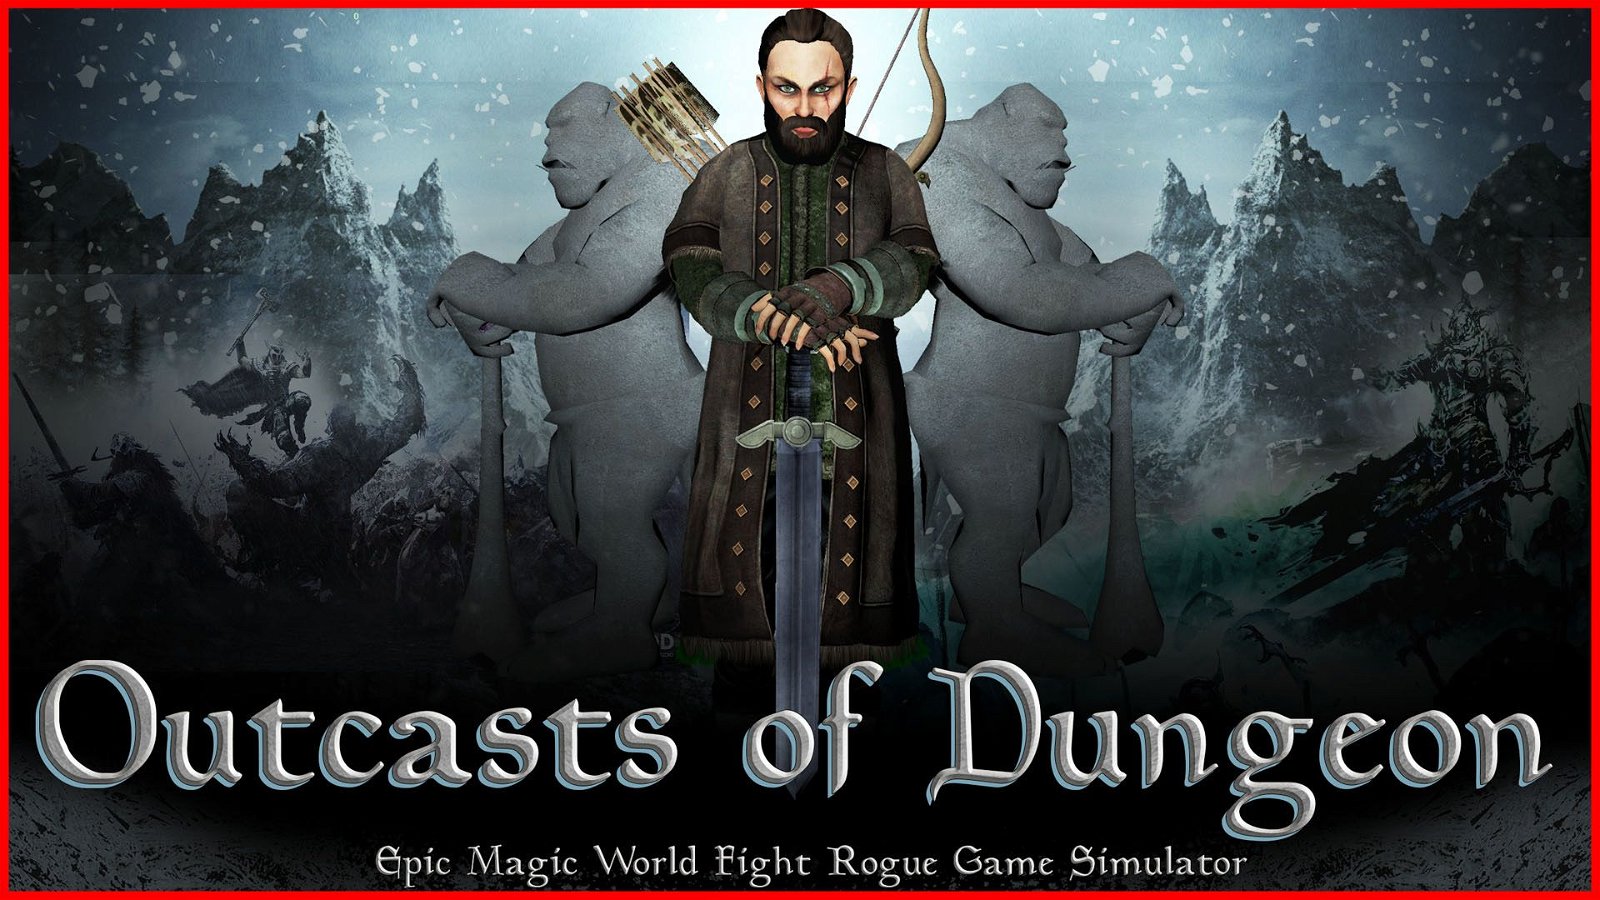 Image of Outcasts of Dungeon: Epic Magic World Fight Rogue Game Simulator